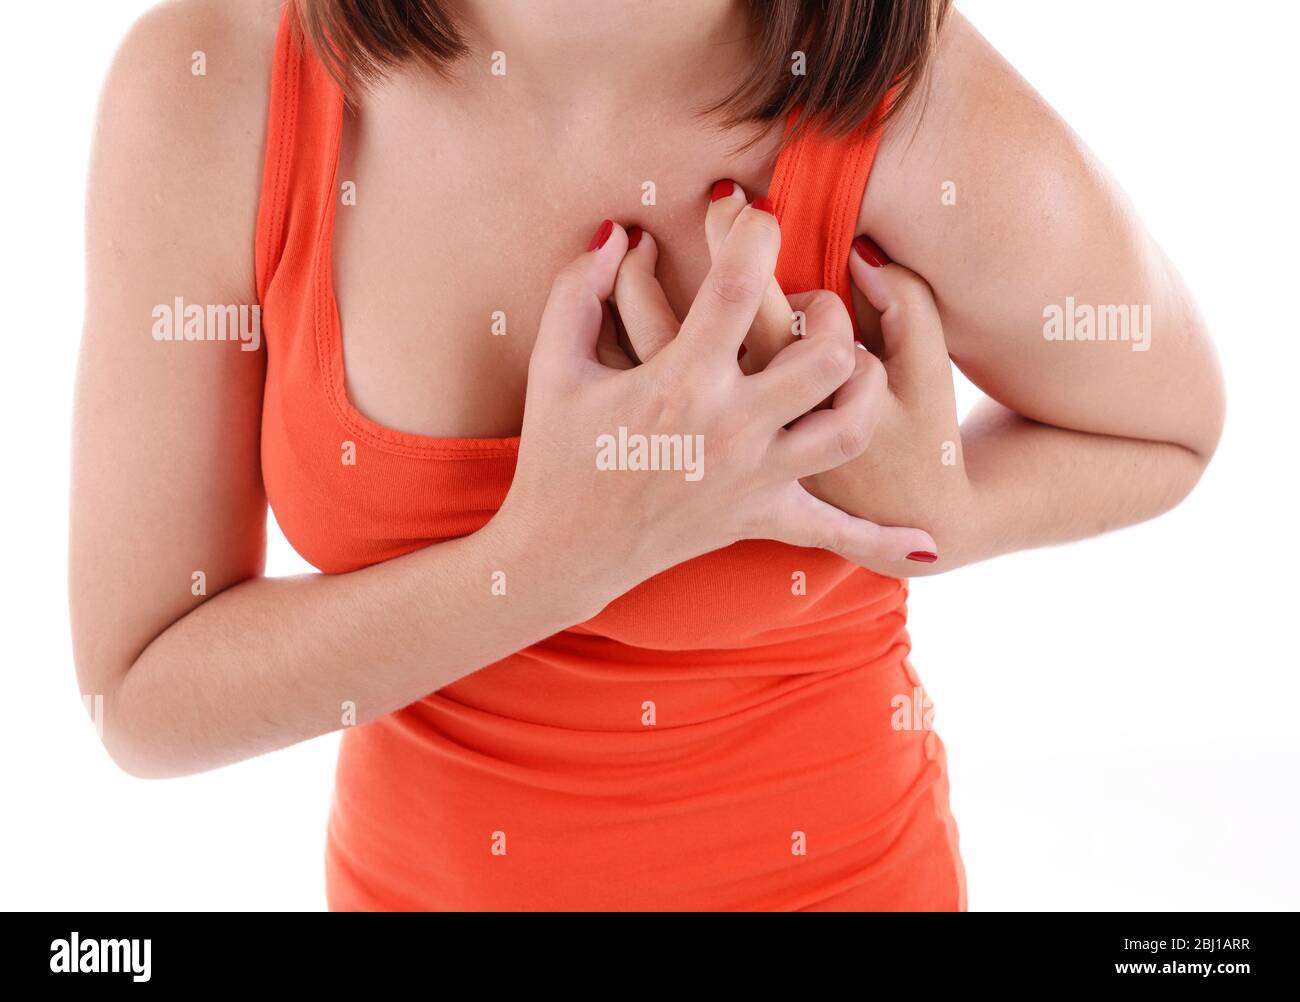 Woman having chest pain - heart attack. On white background Stock